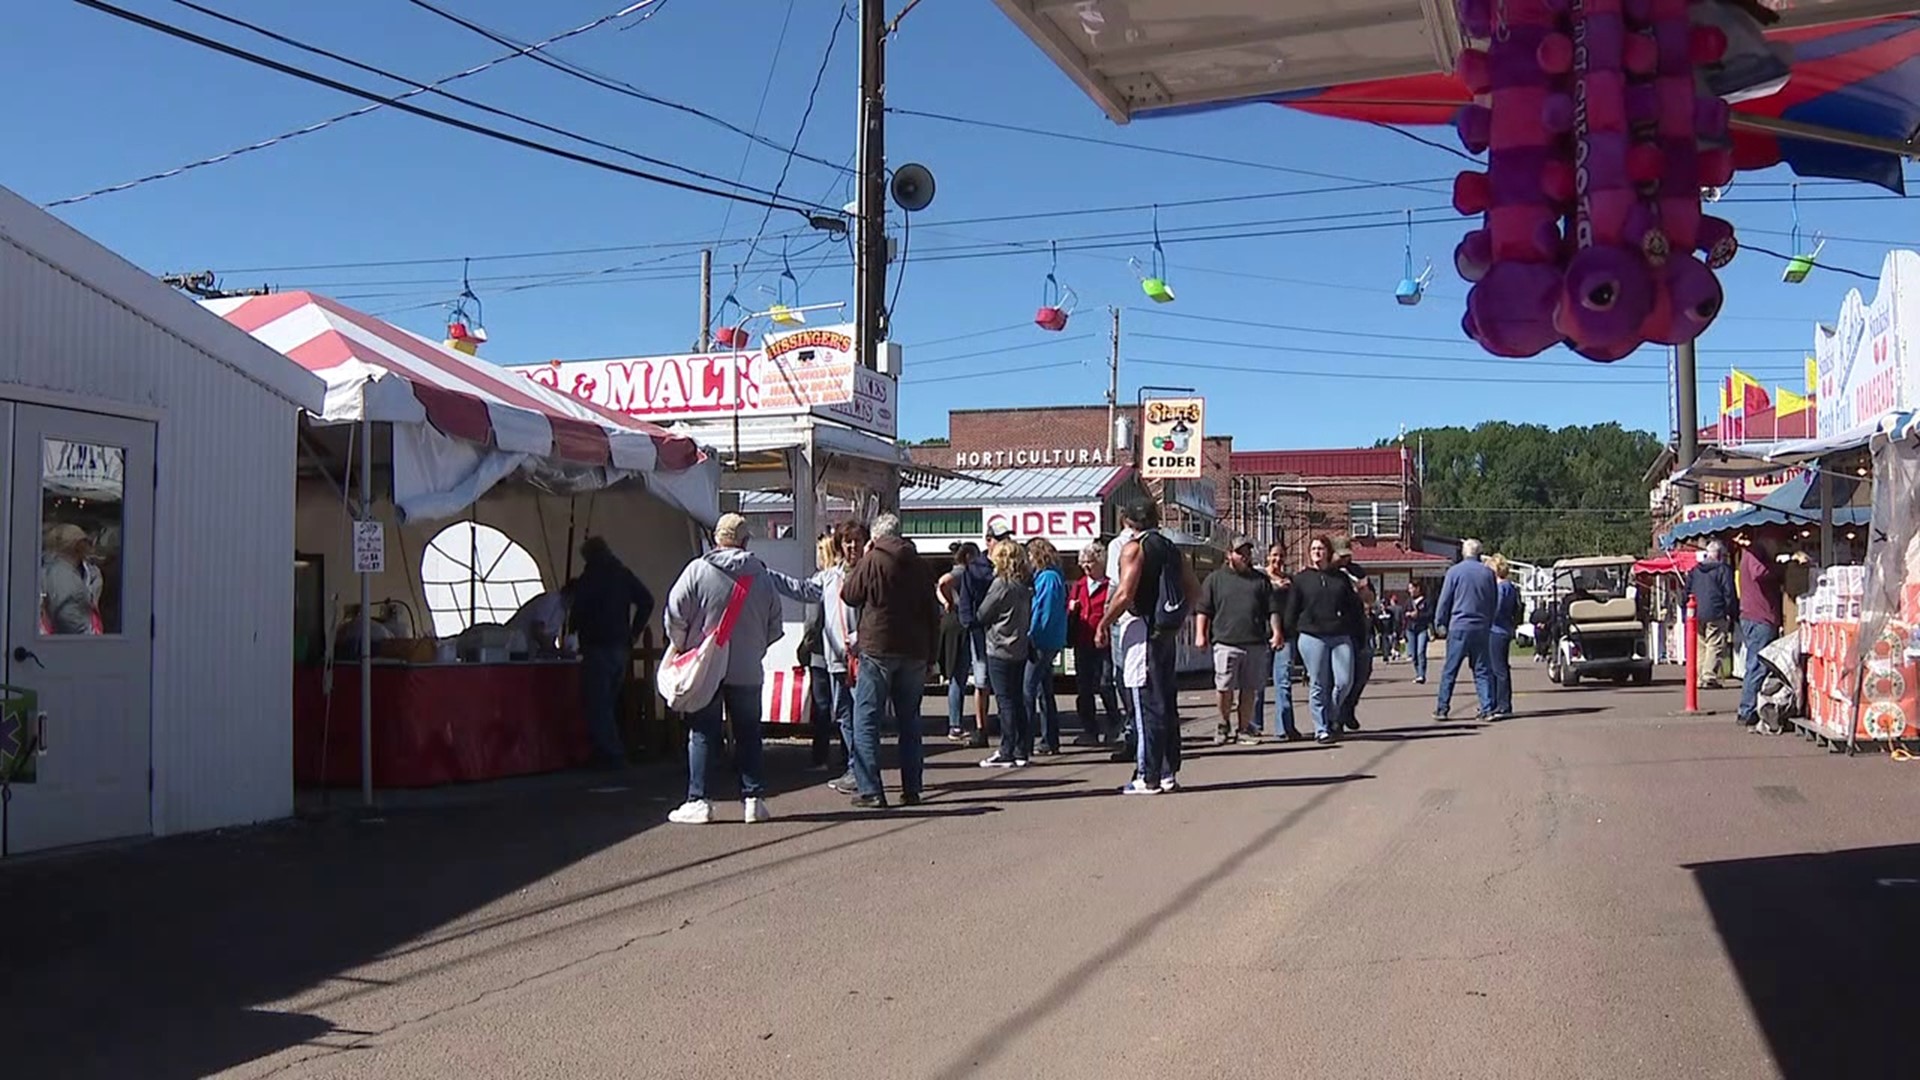 It was a beautiful day for the vendors to start gearing up before the fair officially kicks off Saturday.